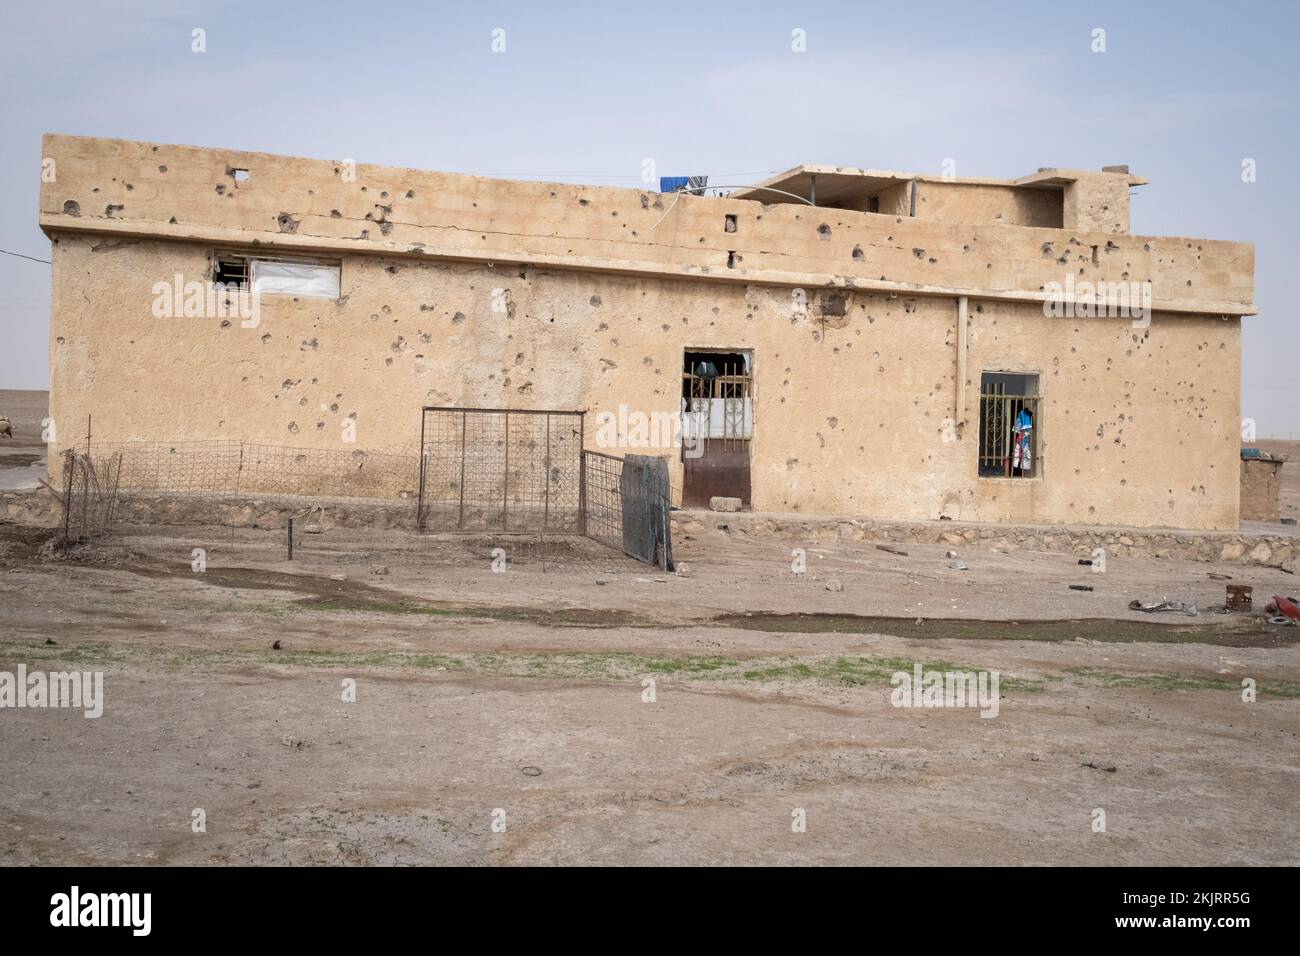 Iraq, Ninawa province, Tall Afar on 2022-10-17. Report on explosive remnants of war in Iraq, one of the most contaminated countries in the world after Stock Photo